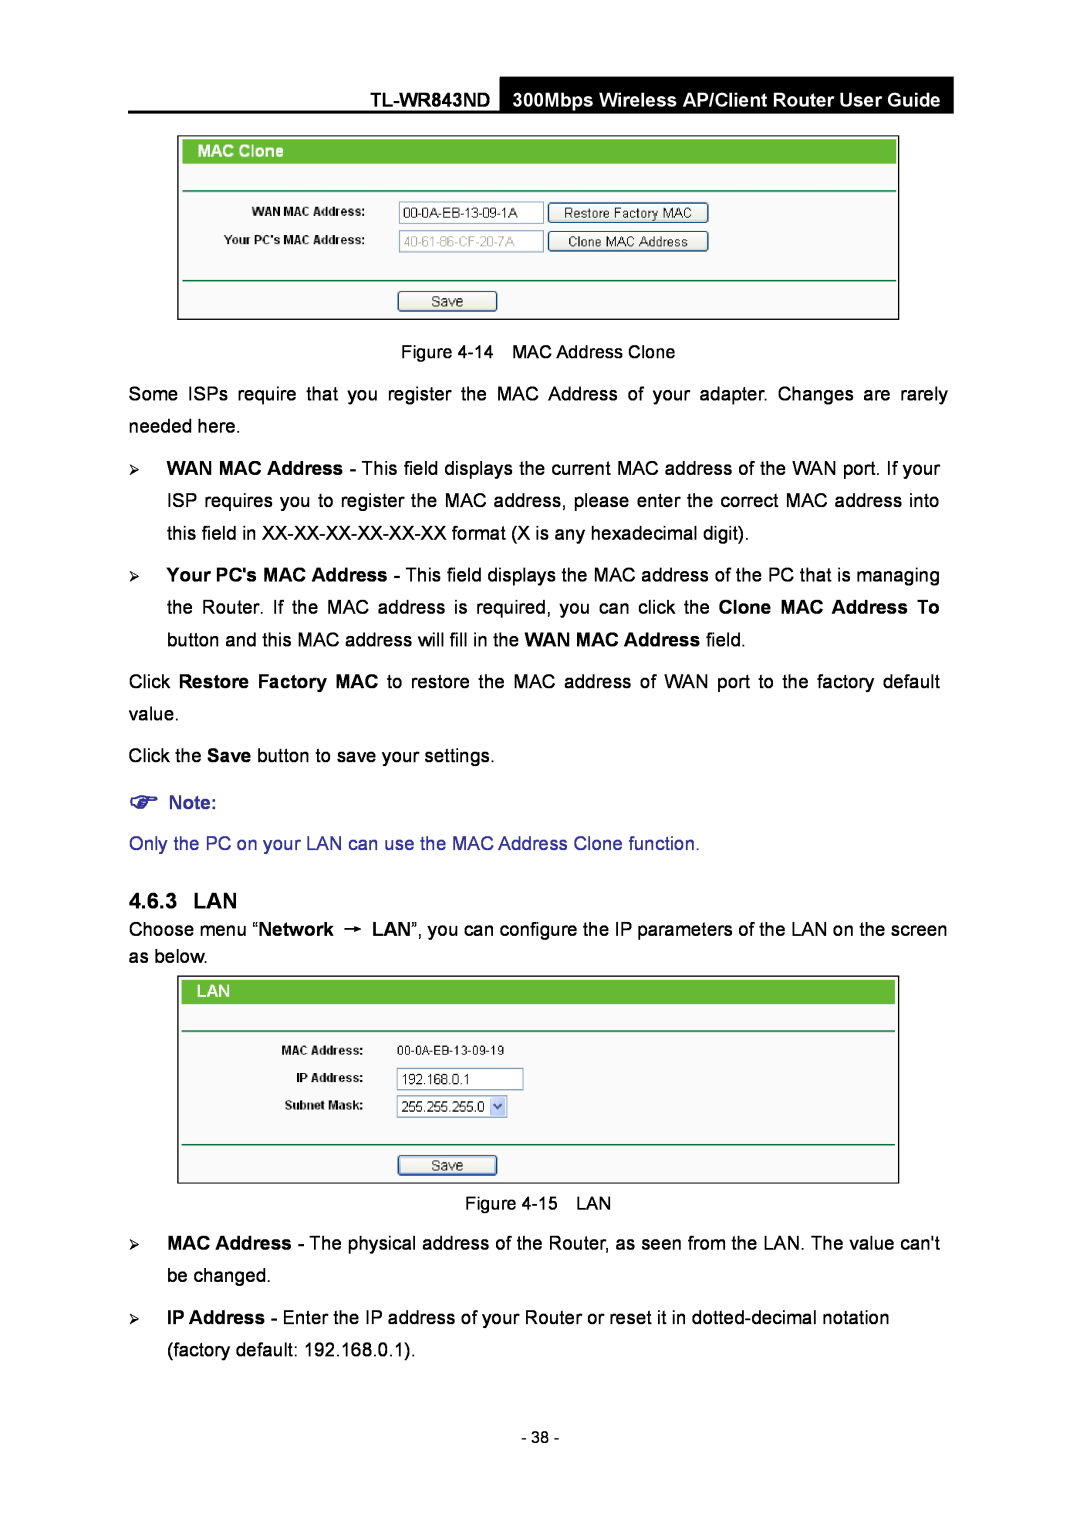 TP-Link TL-WR843ND manual 4.6.3 LAN, Only the PC on your LAN can use the MAC Address Clone function,  Note 